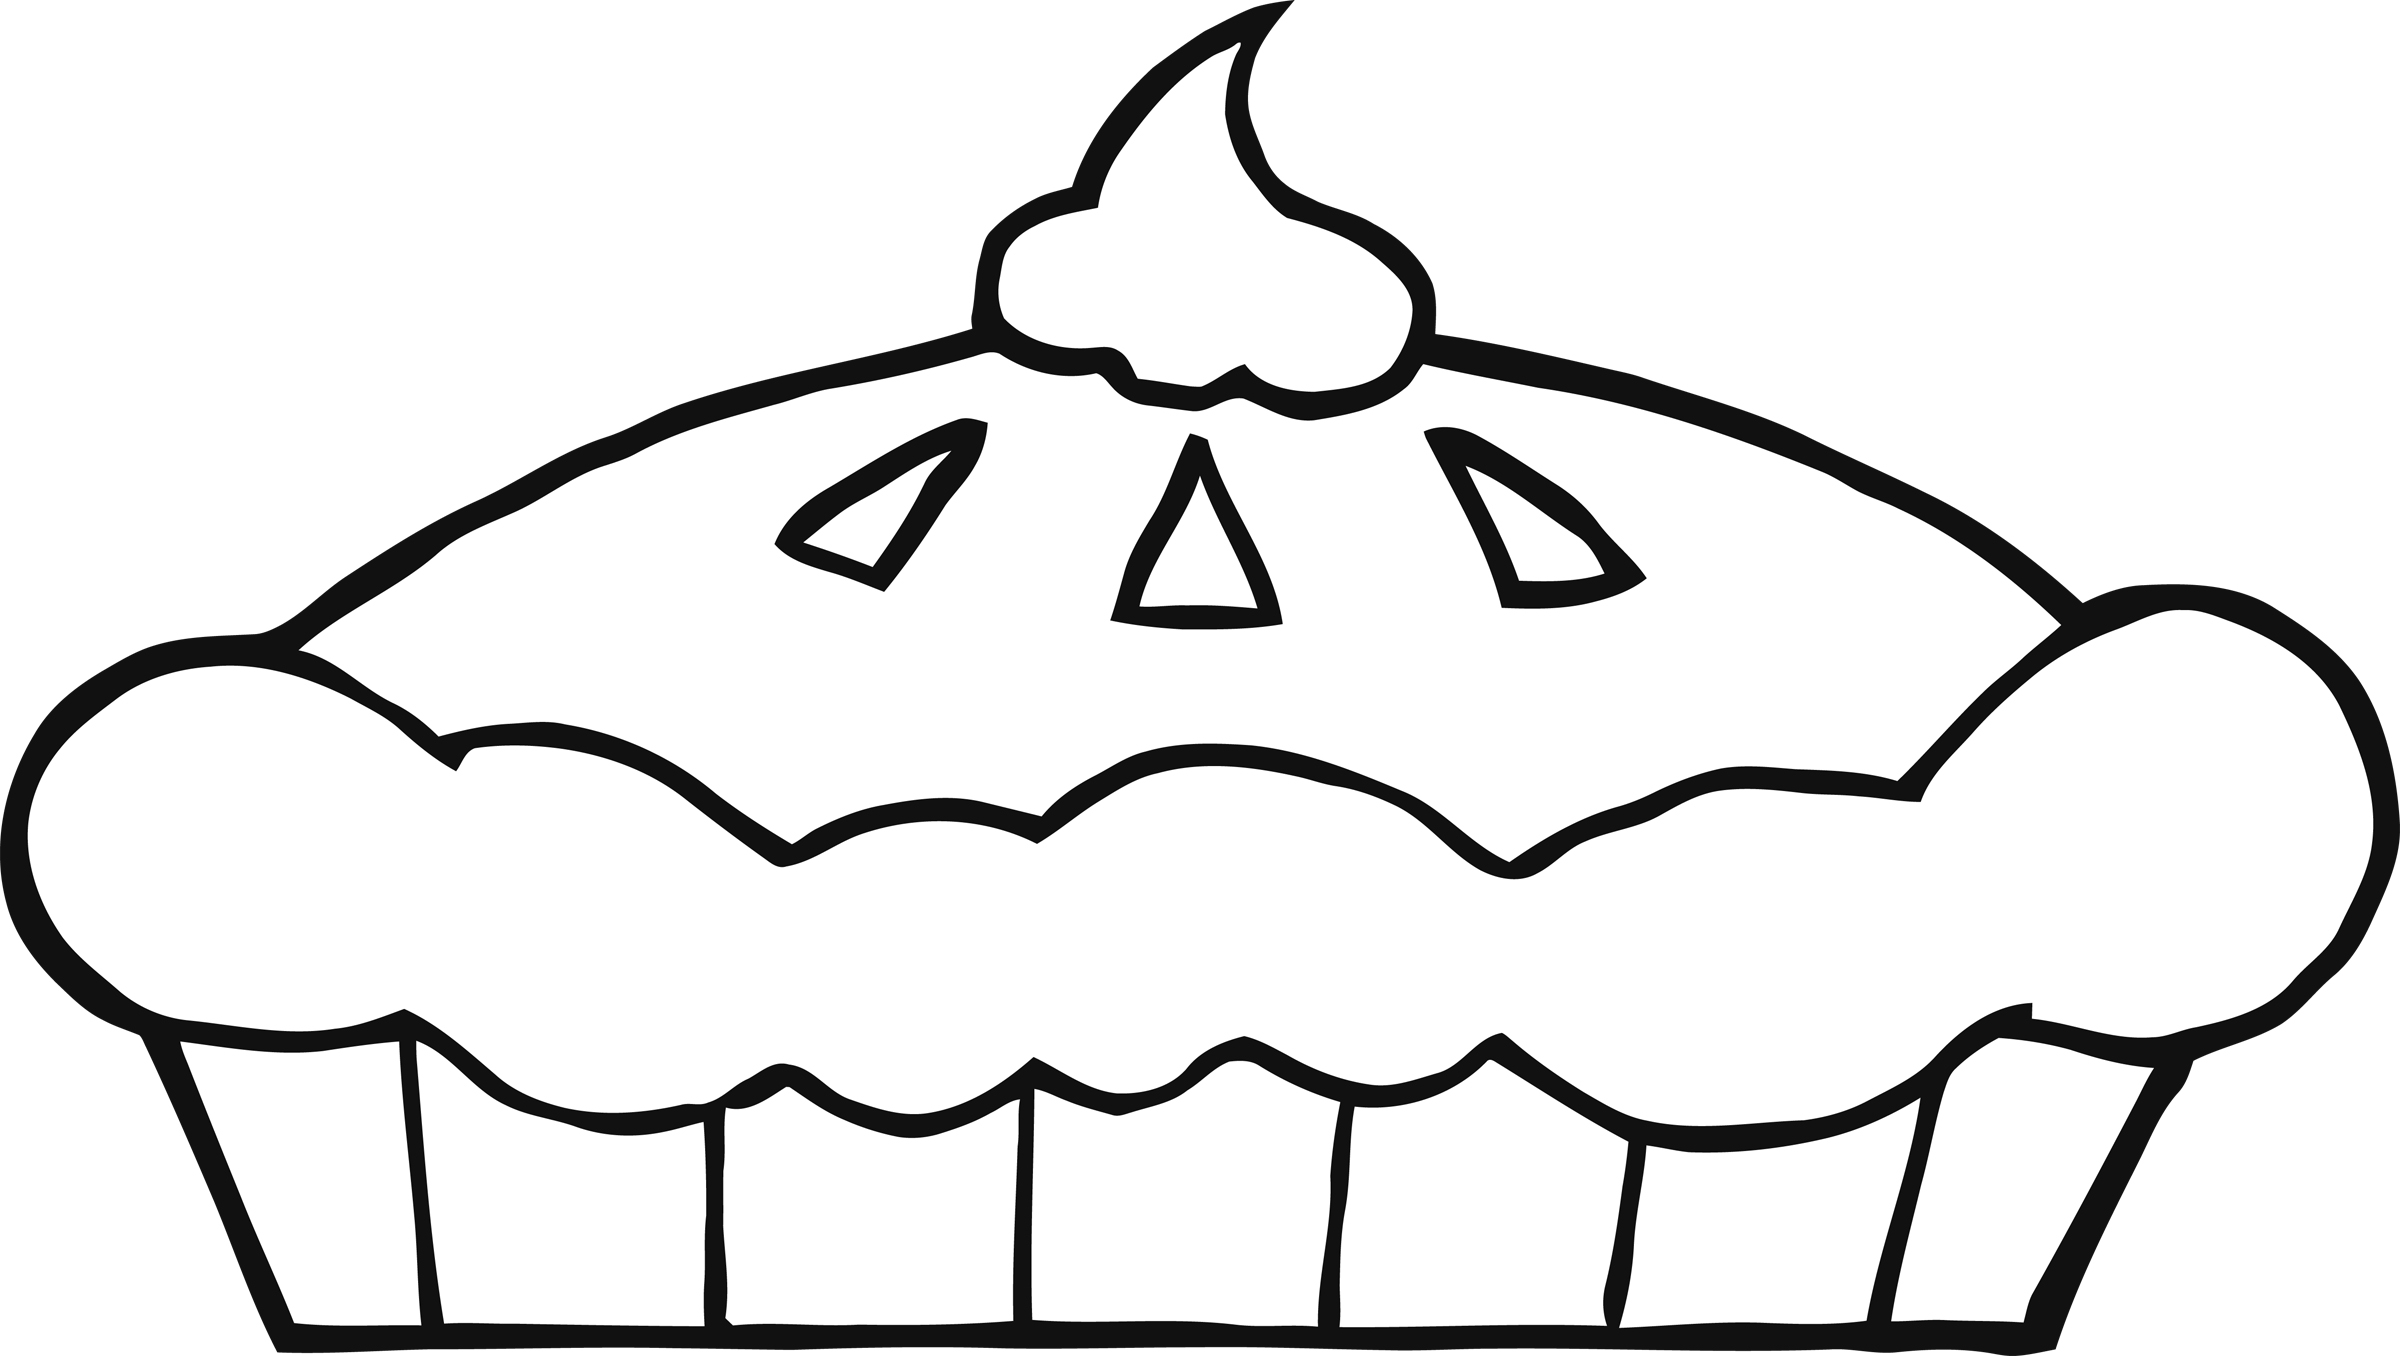 Pie in the face clip art clipart - Cliparting.com